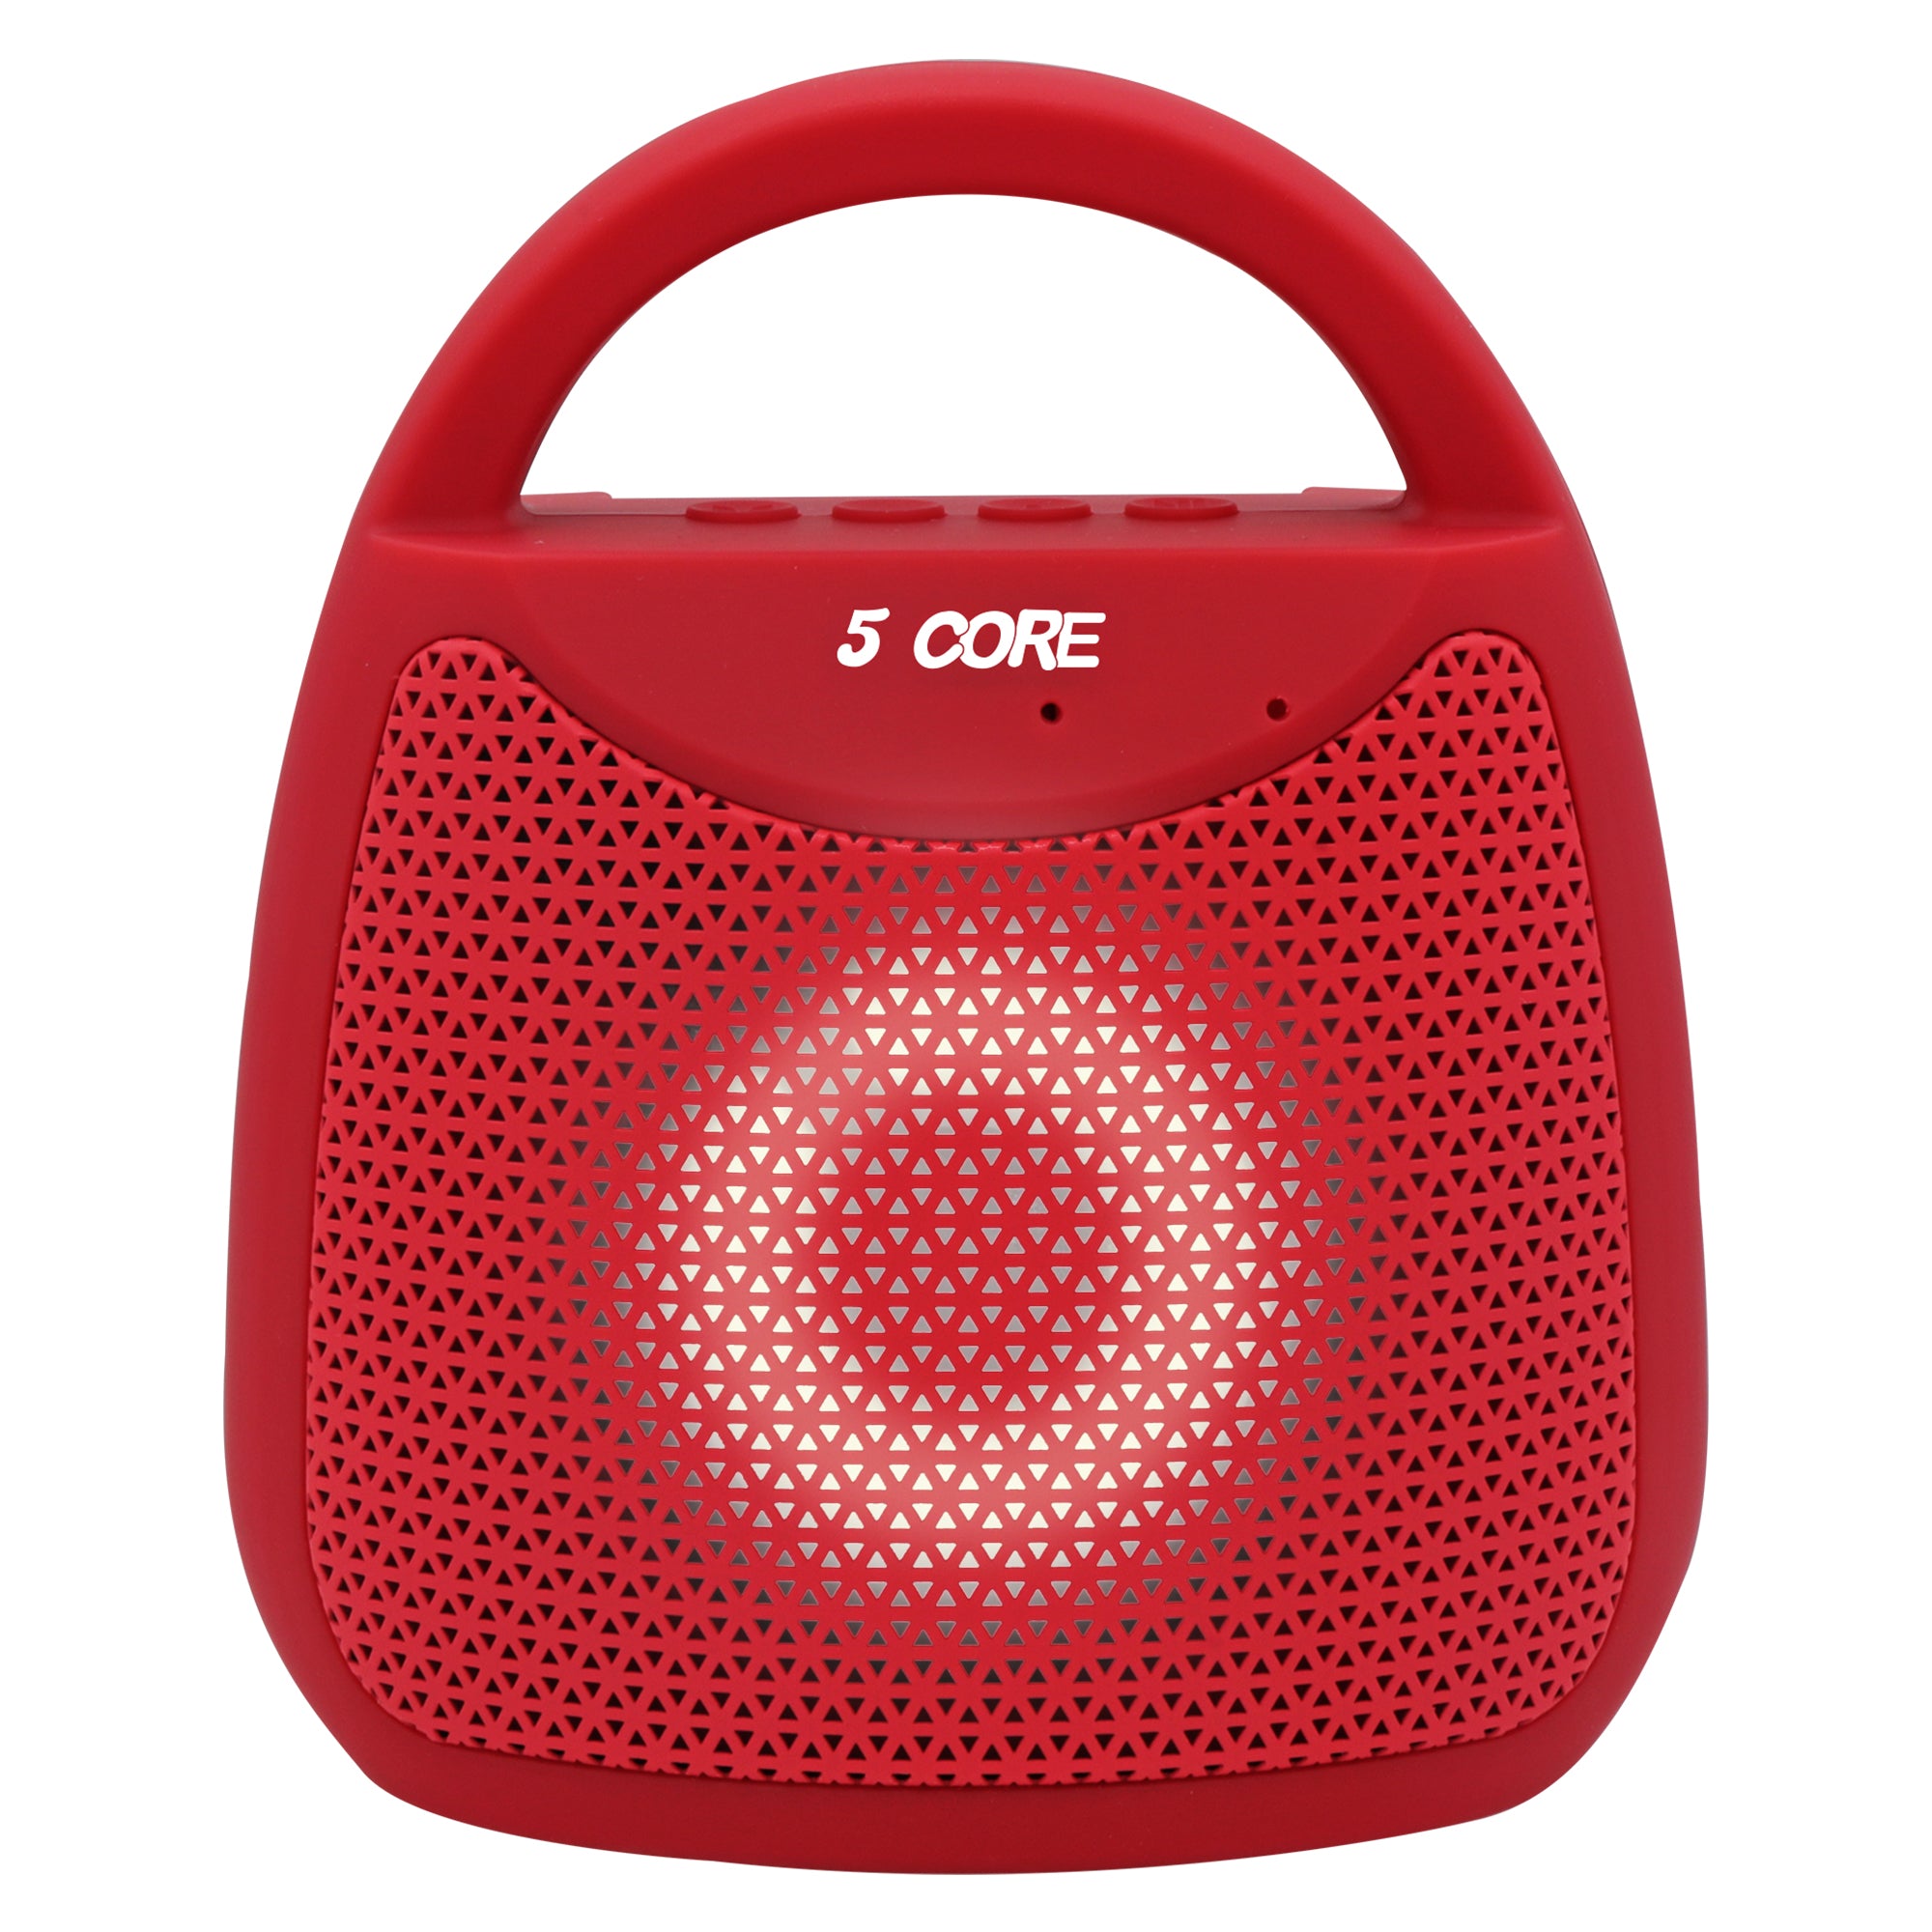 5 Core Red Bluetooth Speaker Rechargeable Portable Mini Waterproof Speaker for Travel Outdoor